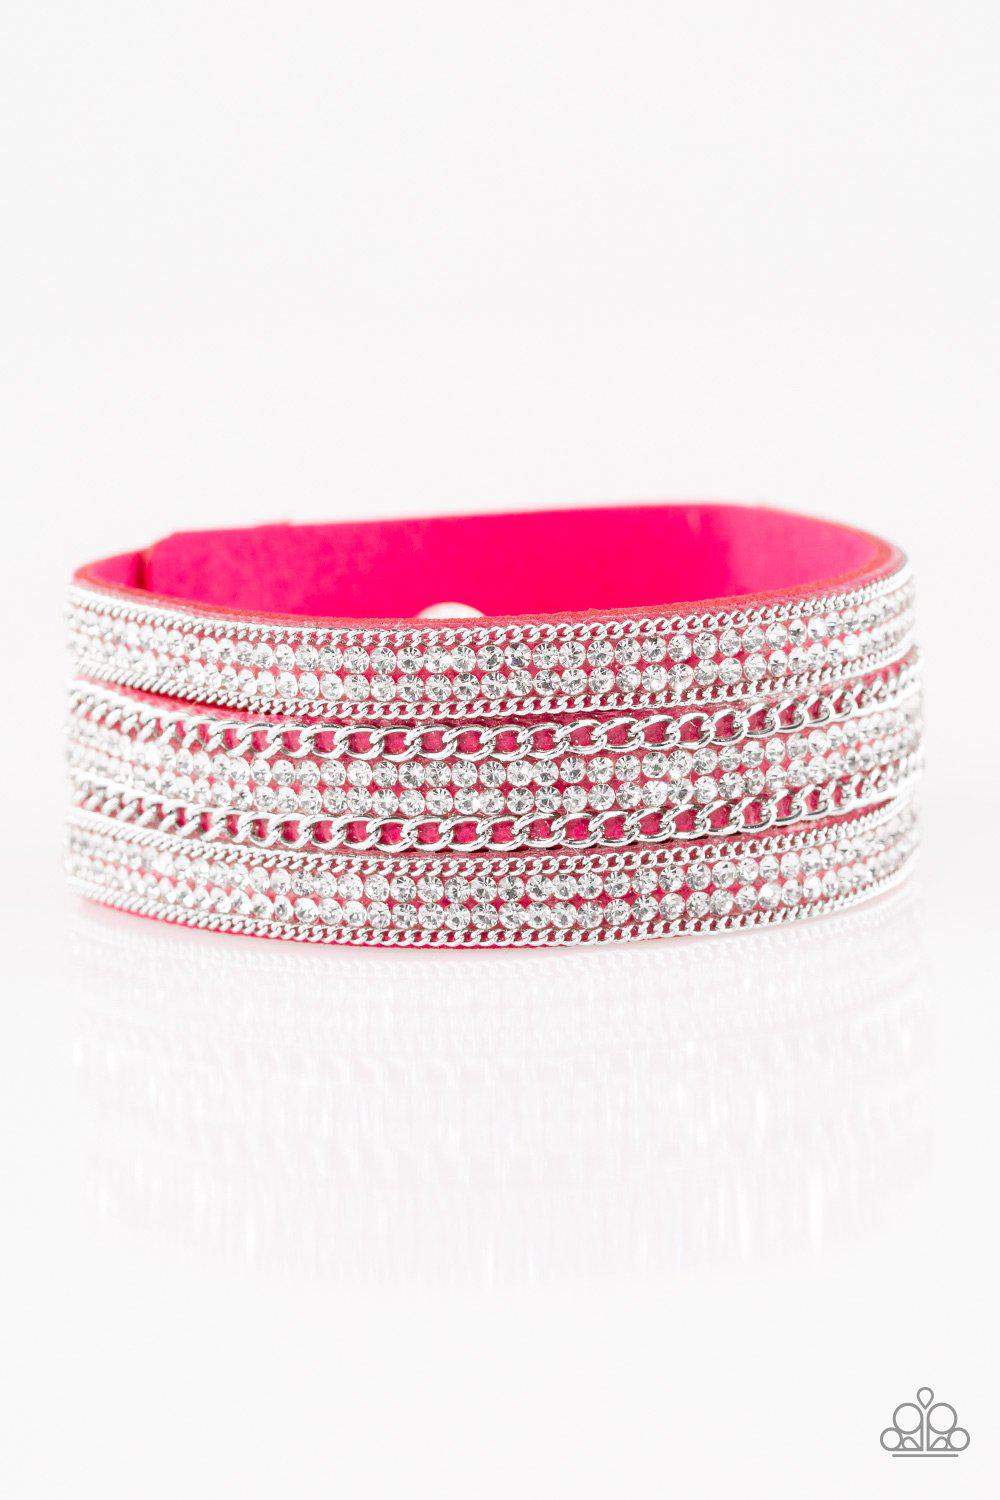 Dangerously Drama Queen Hot Pink Urban Wrap Snap Bracelet - Paparazzi Accessories-CarasShop.com - $5 Jewelry by Cara Jewels